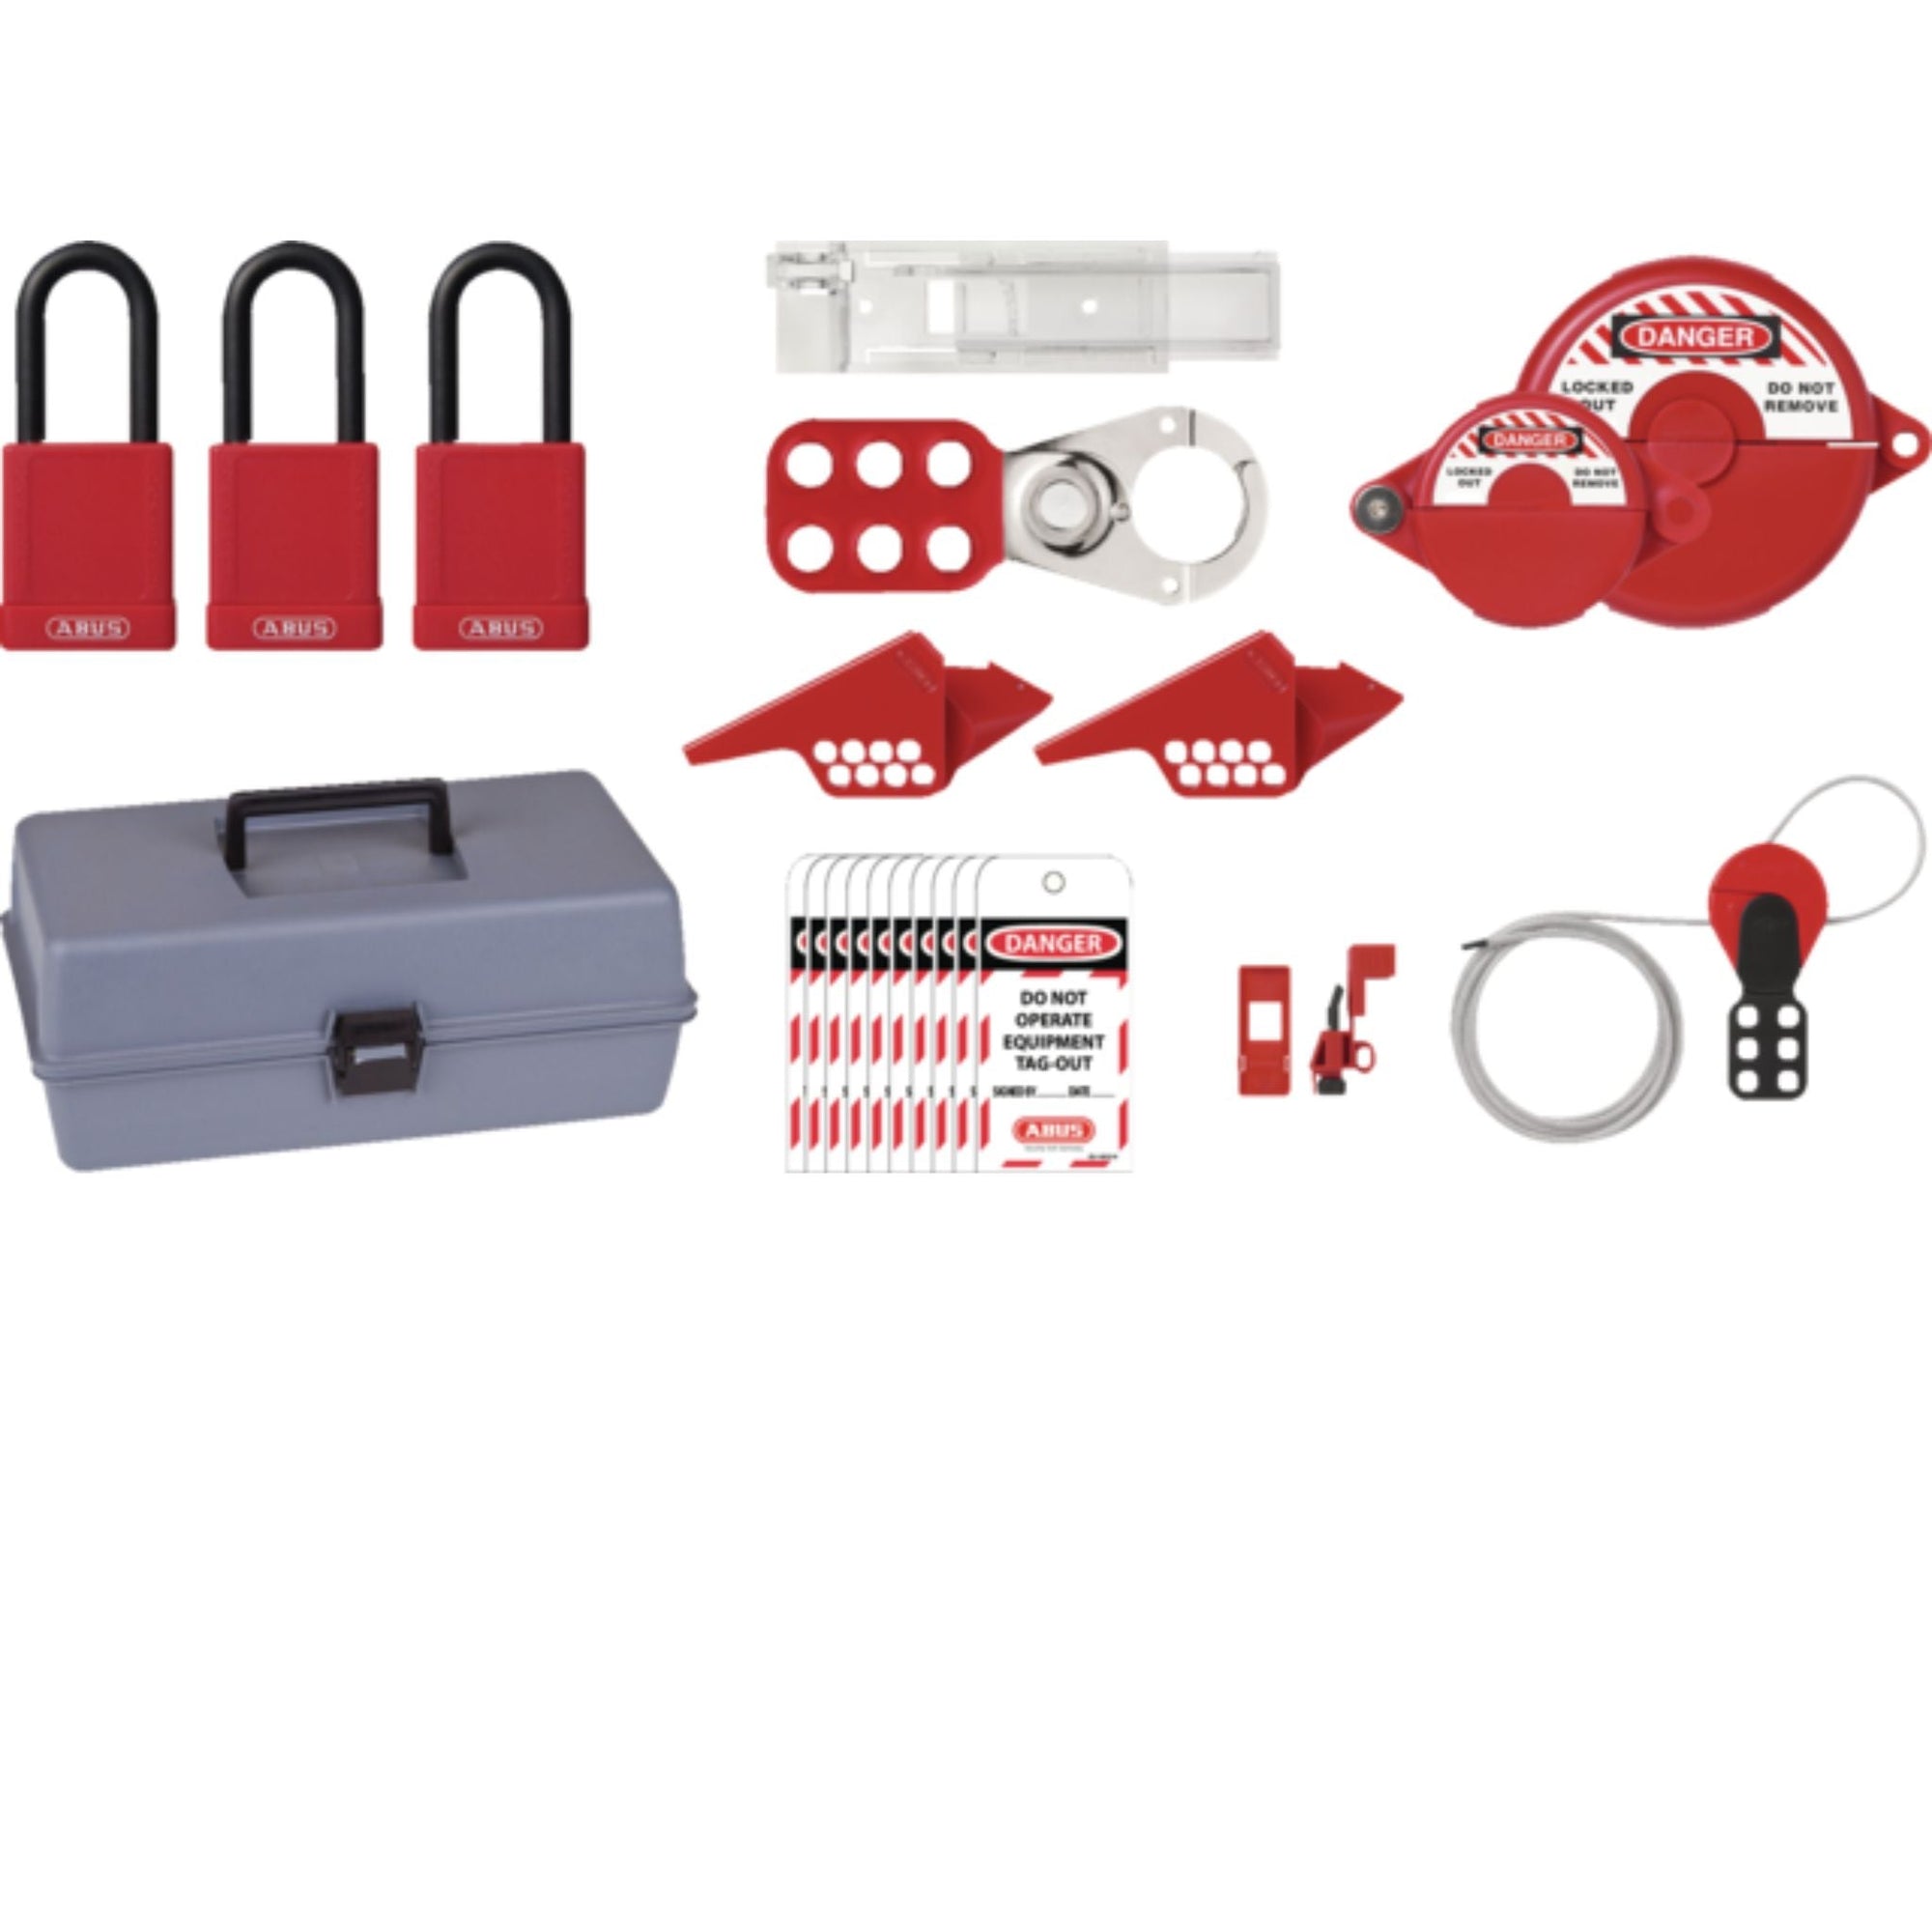 Abus K930 (97181) Valve Toolbox Kit Stores and Organizes Lockout Devices In One Location - The Lock Source